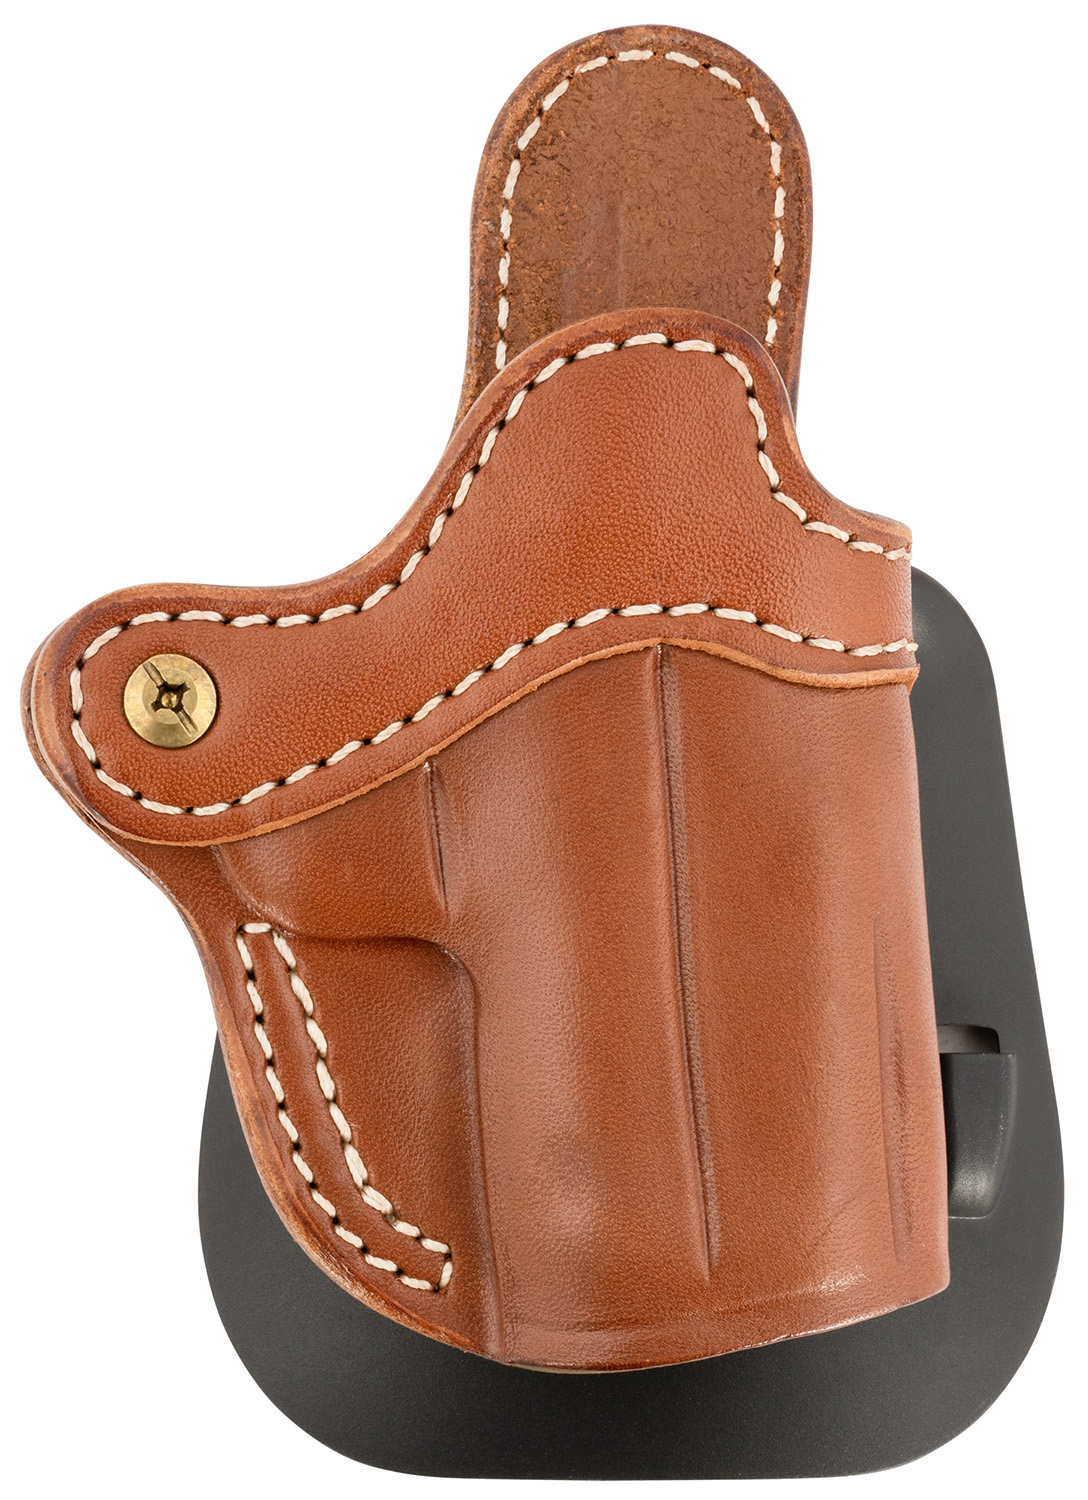 1791 Gunleather ORPDHCCBRR Paddle Holster Optic Ready Glock 43 Size Compact Classic Brown Fits Sig P365 Fits Taurus GX4